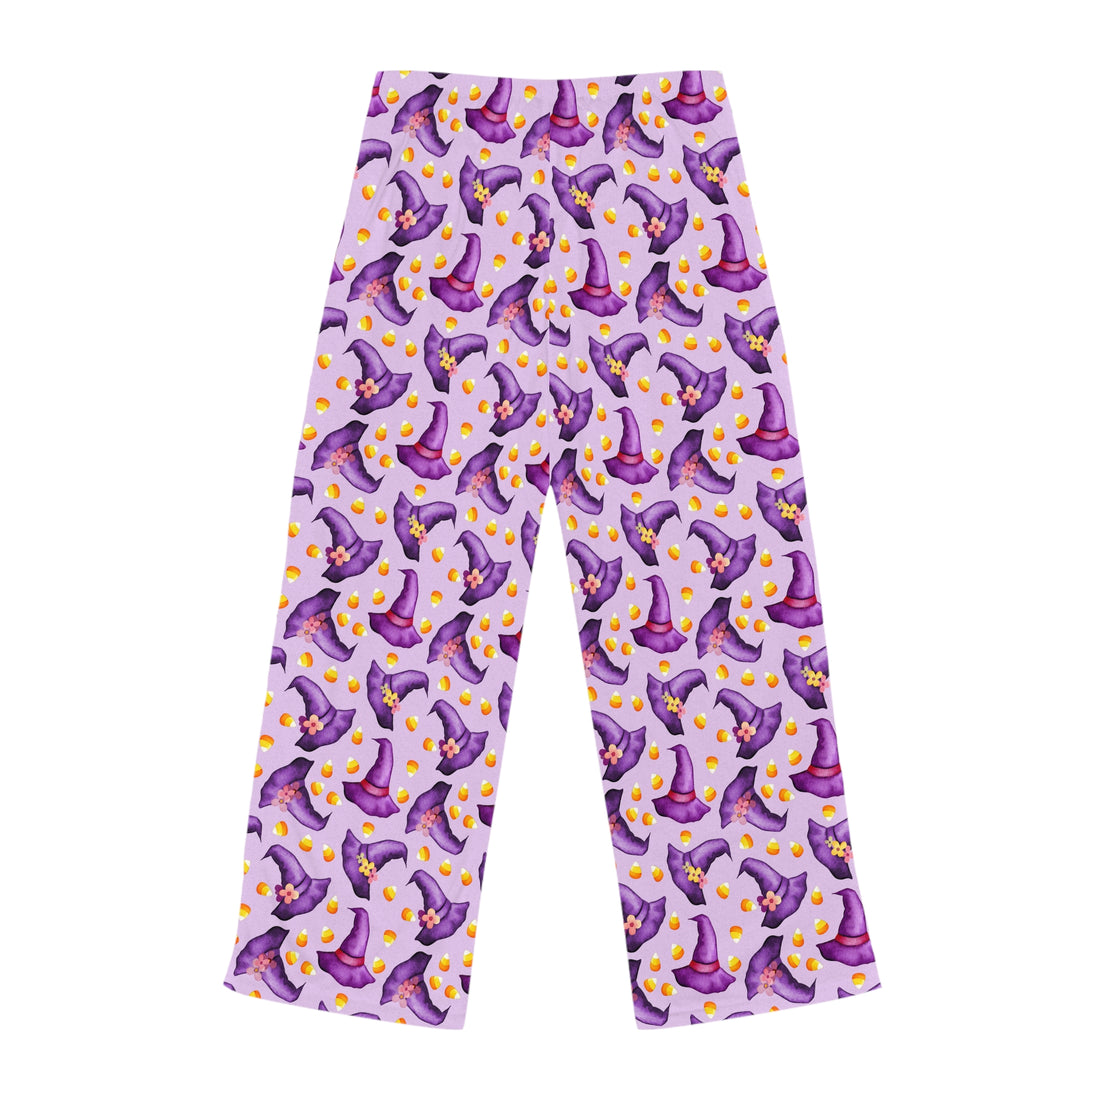 Witches Hat Women's Pajama Pants